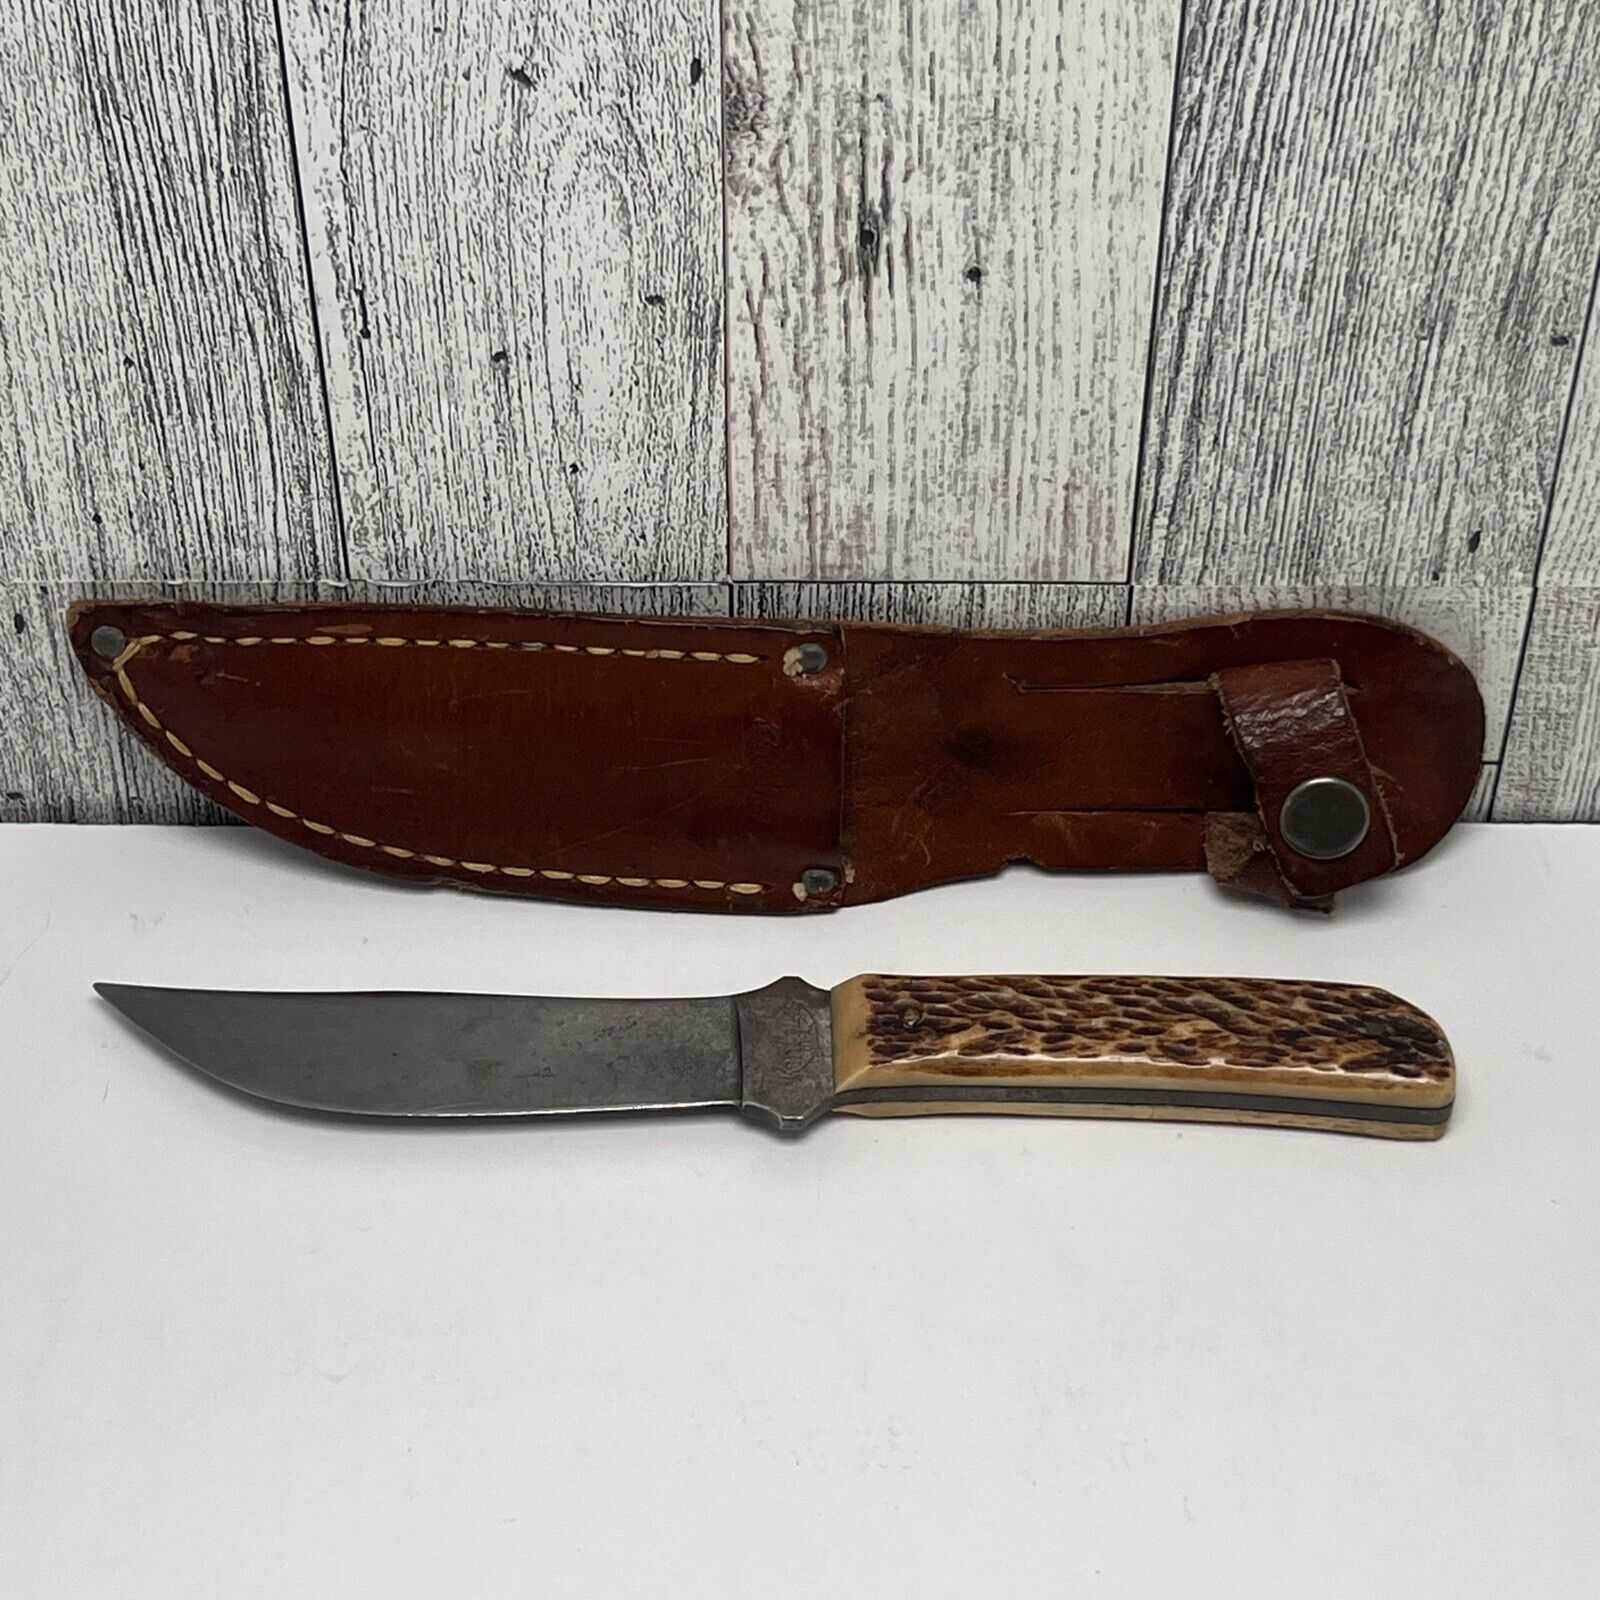 Vintage KINFOLKS #6161 Fixed Blade Stag Hunting Knife w/ Leather Sheath